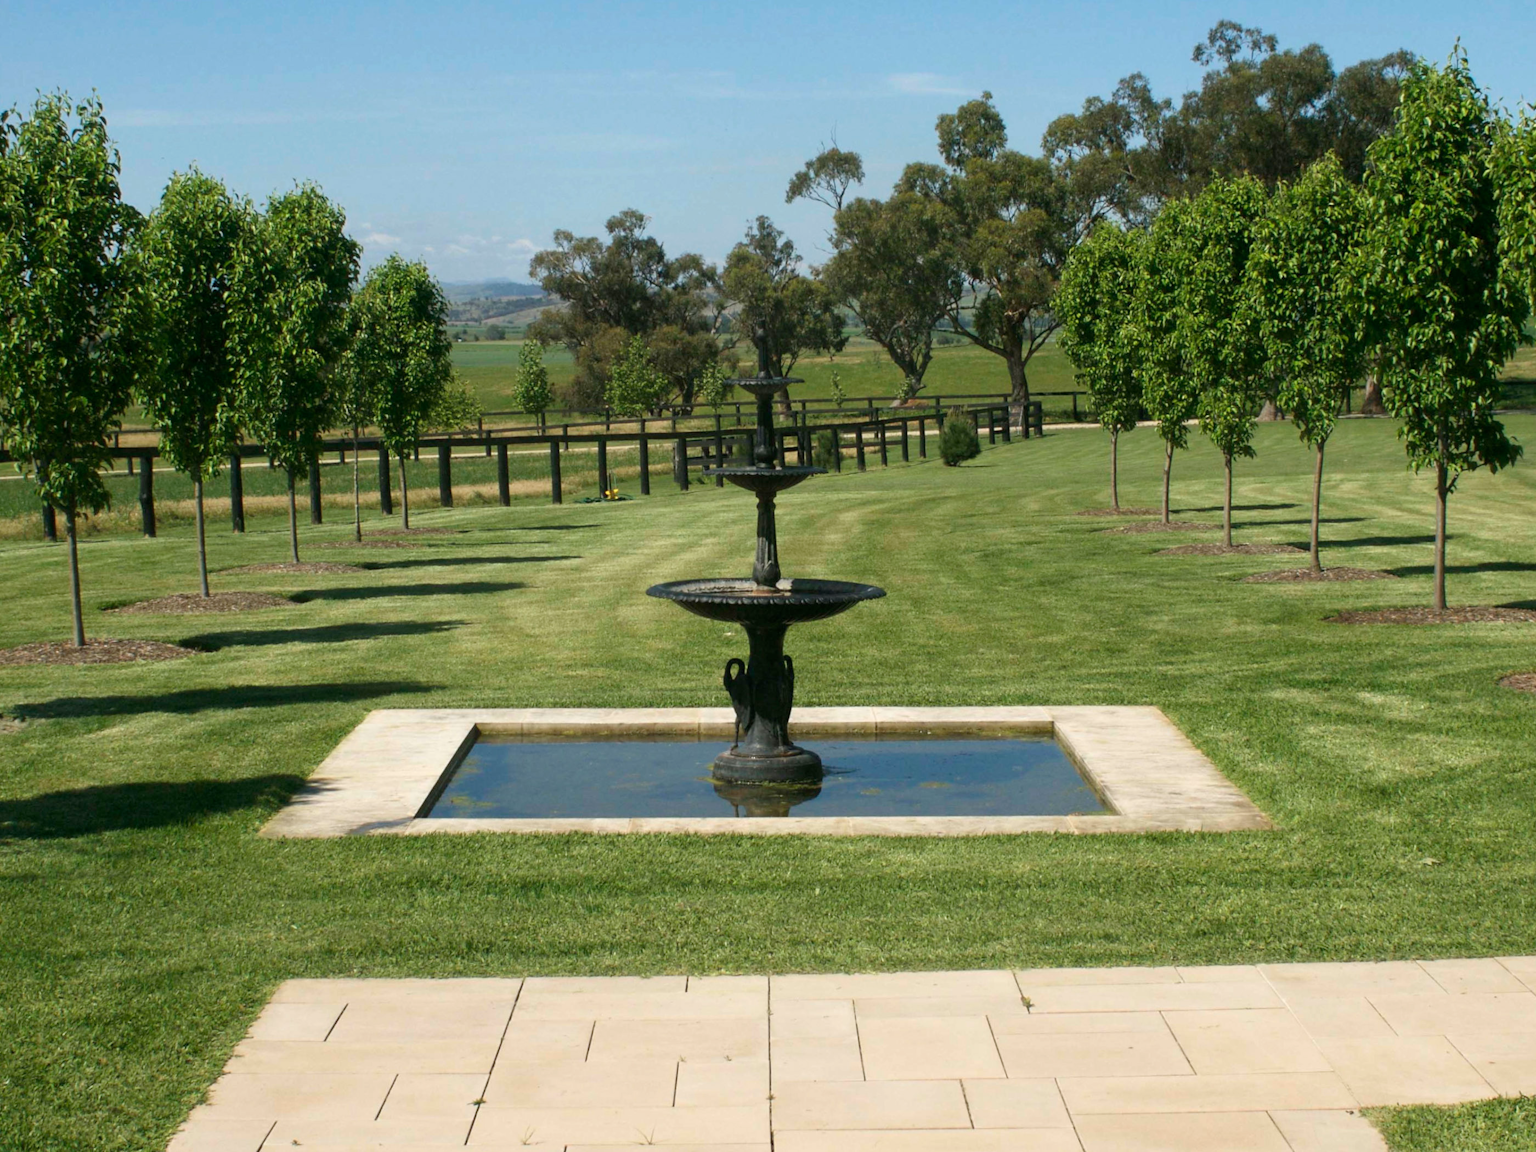 Pond fountain beside pathway using Hawkesbury concrete pavers with avenue of trees behind